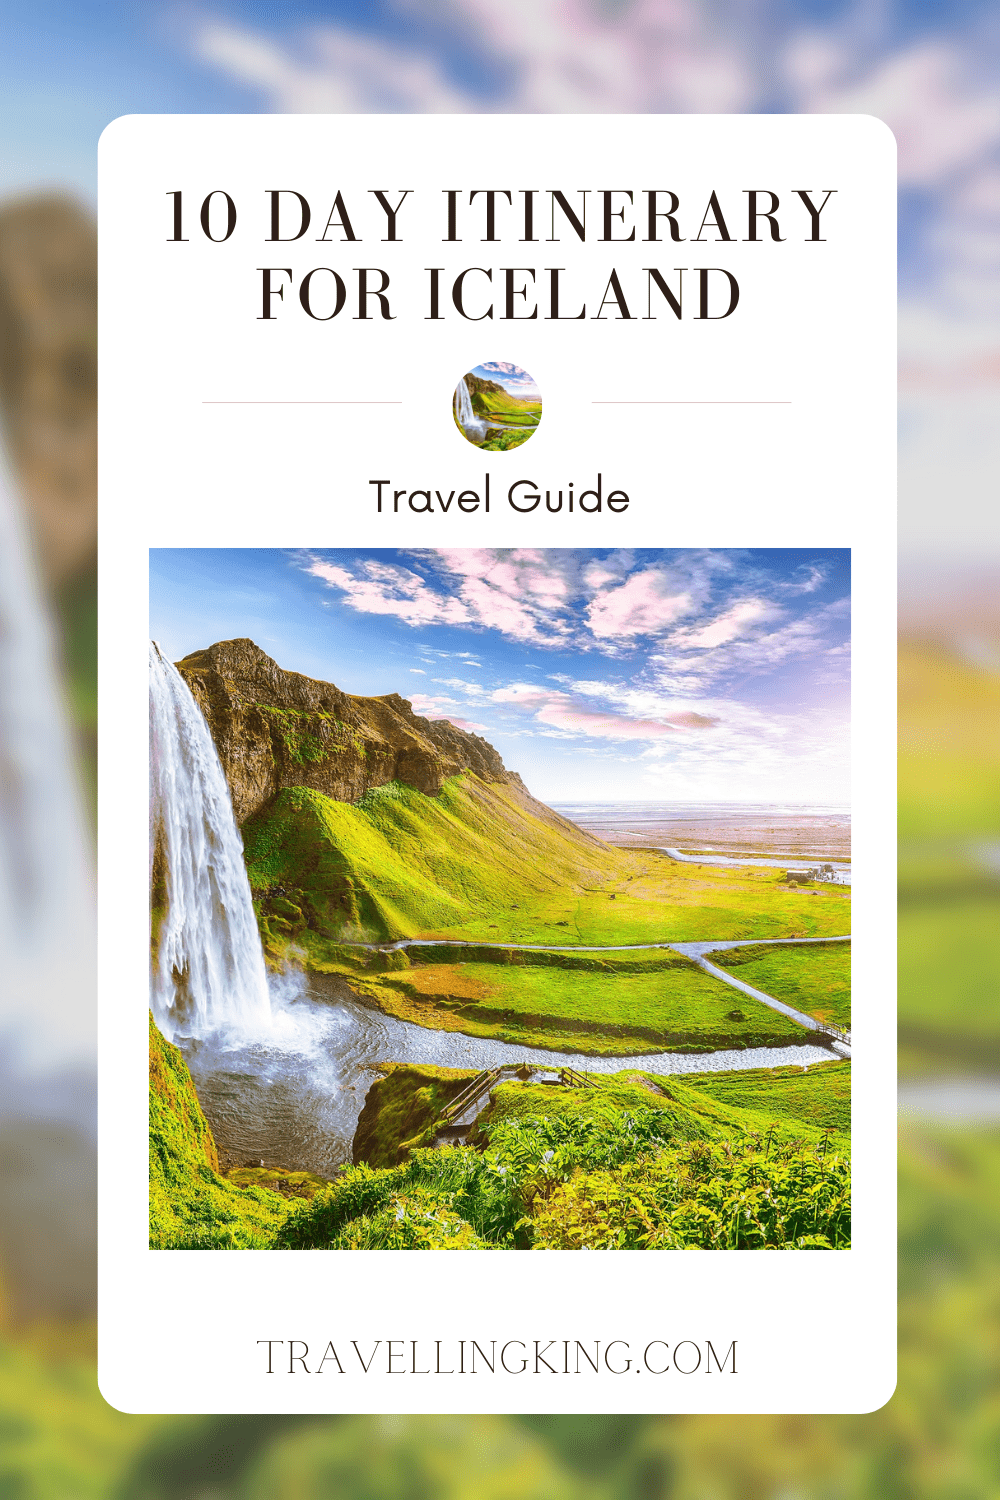 10 Day Itinerary for Iceland